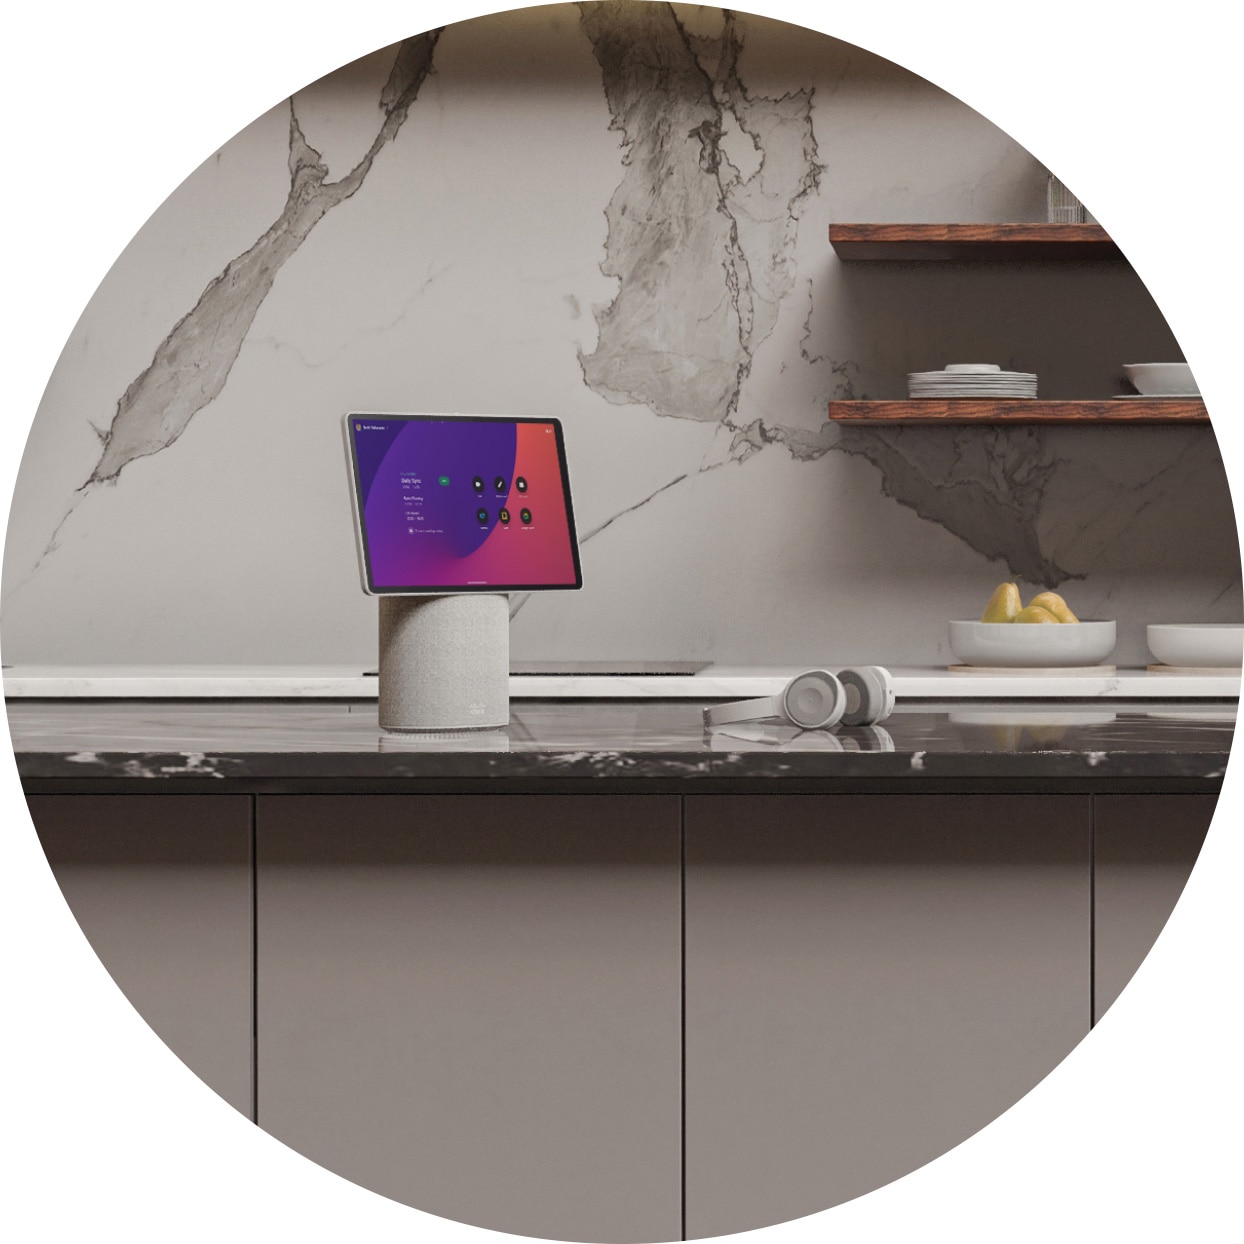 A Cisco Desk Mini and a headset rest on the counter of a modern kitchen, replete with faux marble surfaces and minimalist cabinetry.